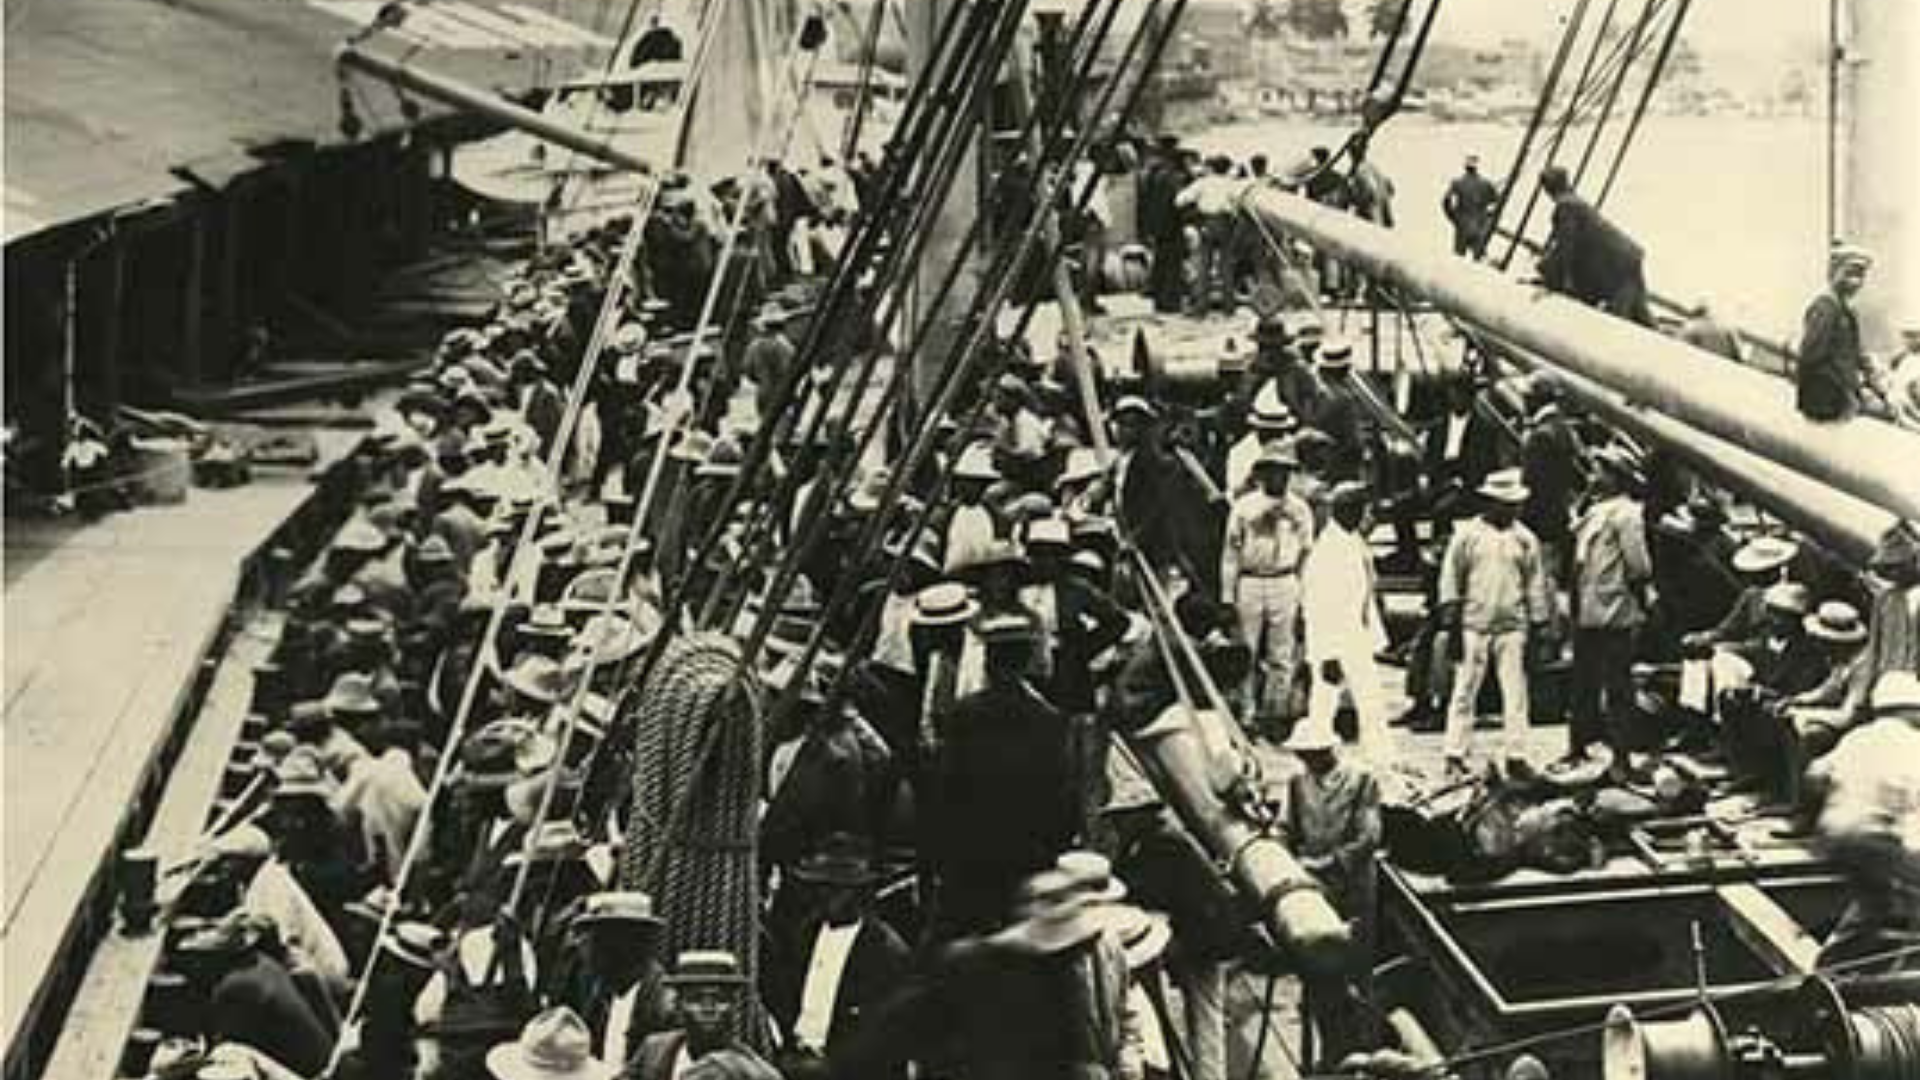 Arrival at Cristobal of S.S Ancon with 1500 labourers from Barbados to work on the site of the Panama Canal